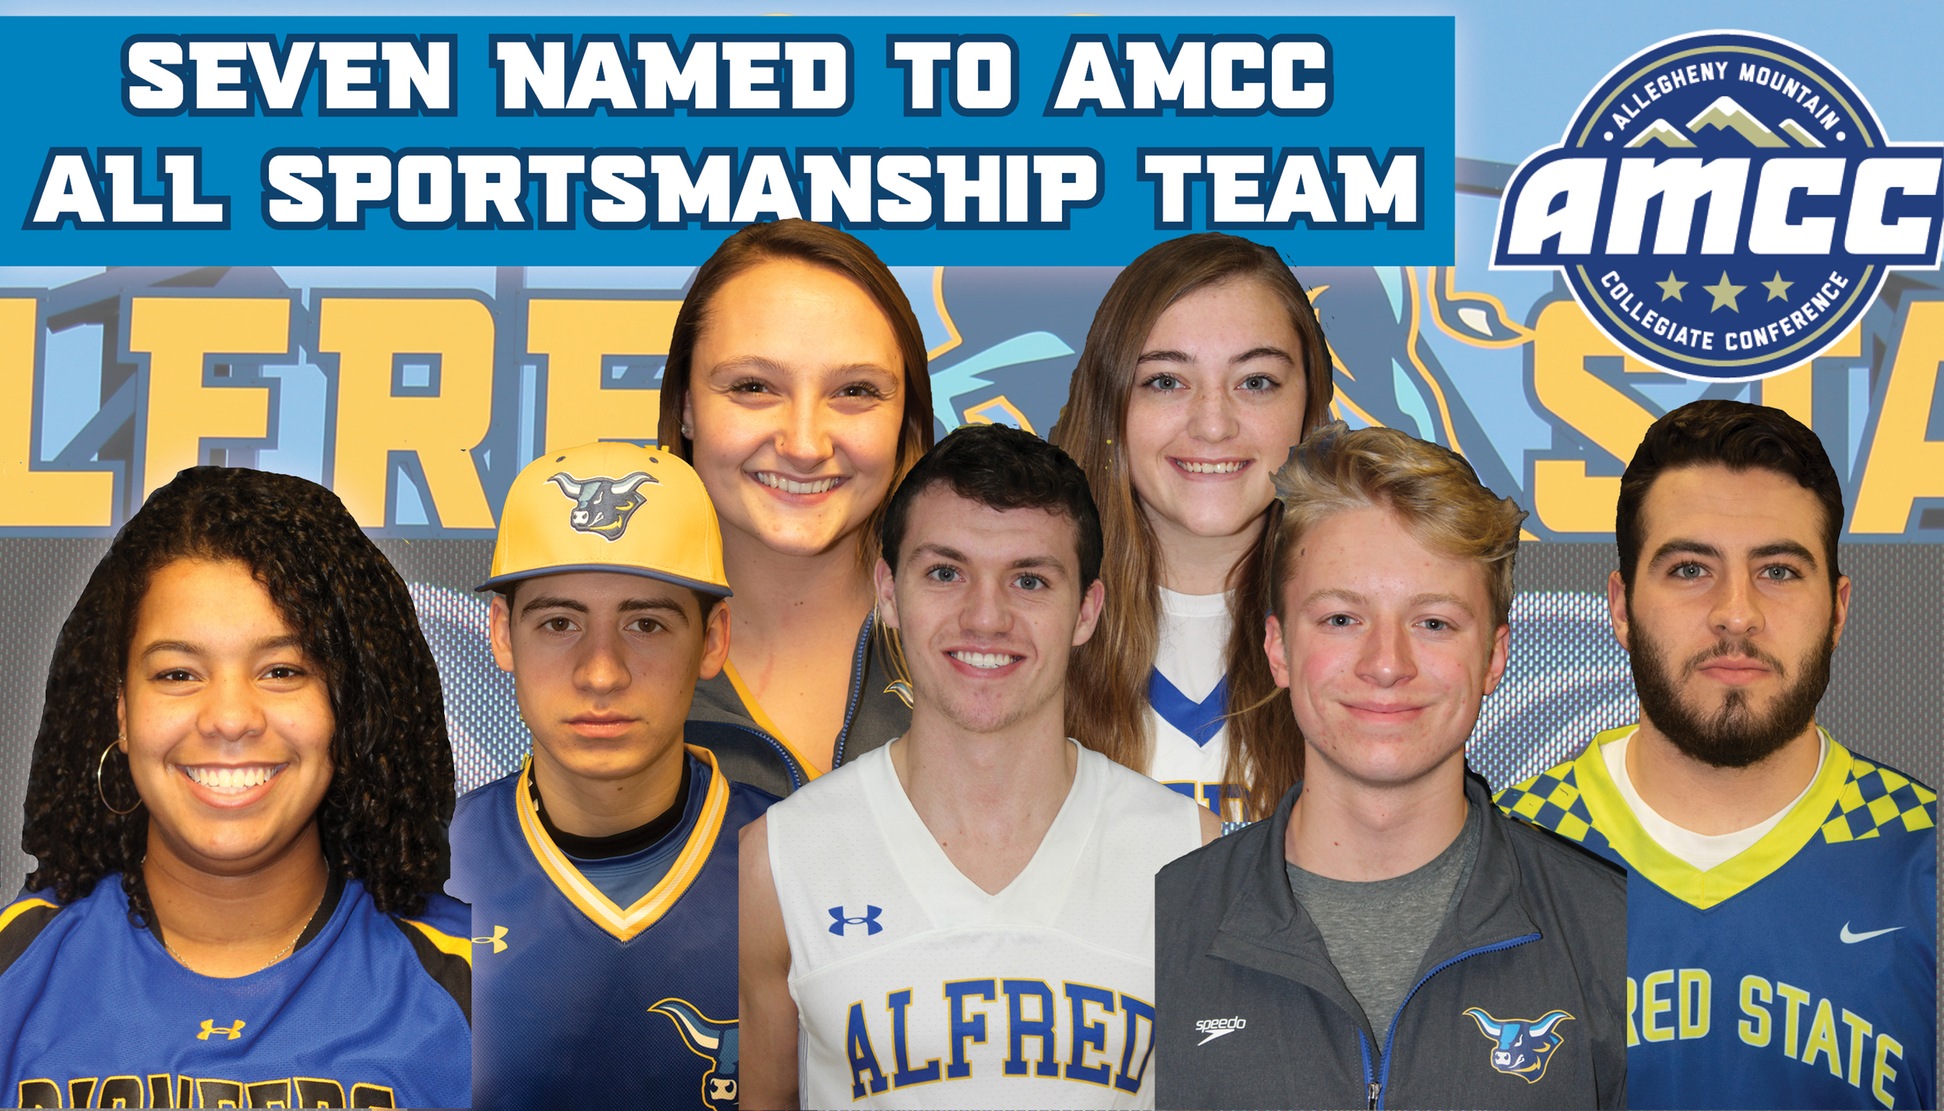 Seven Pioneer Student-Athletes Named to the AMCC All-Sportsmanship Team